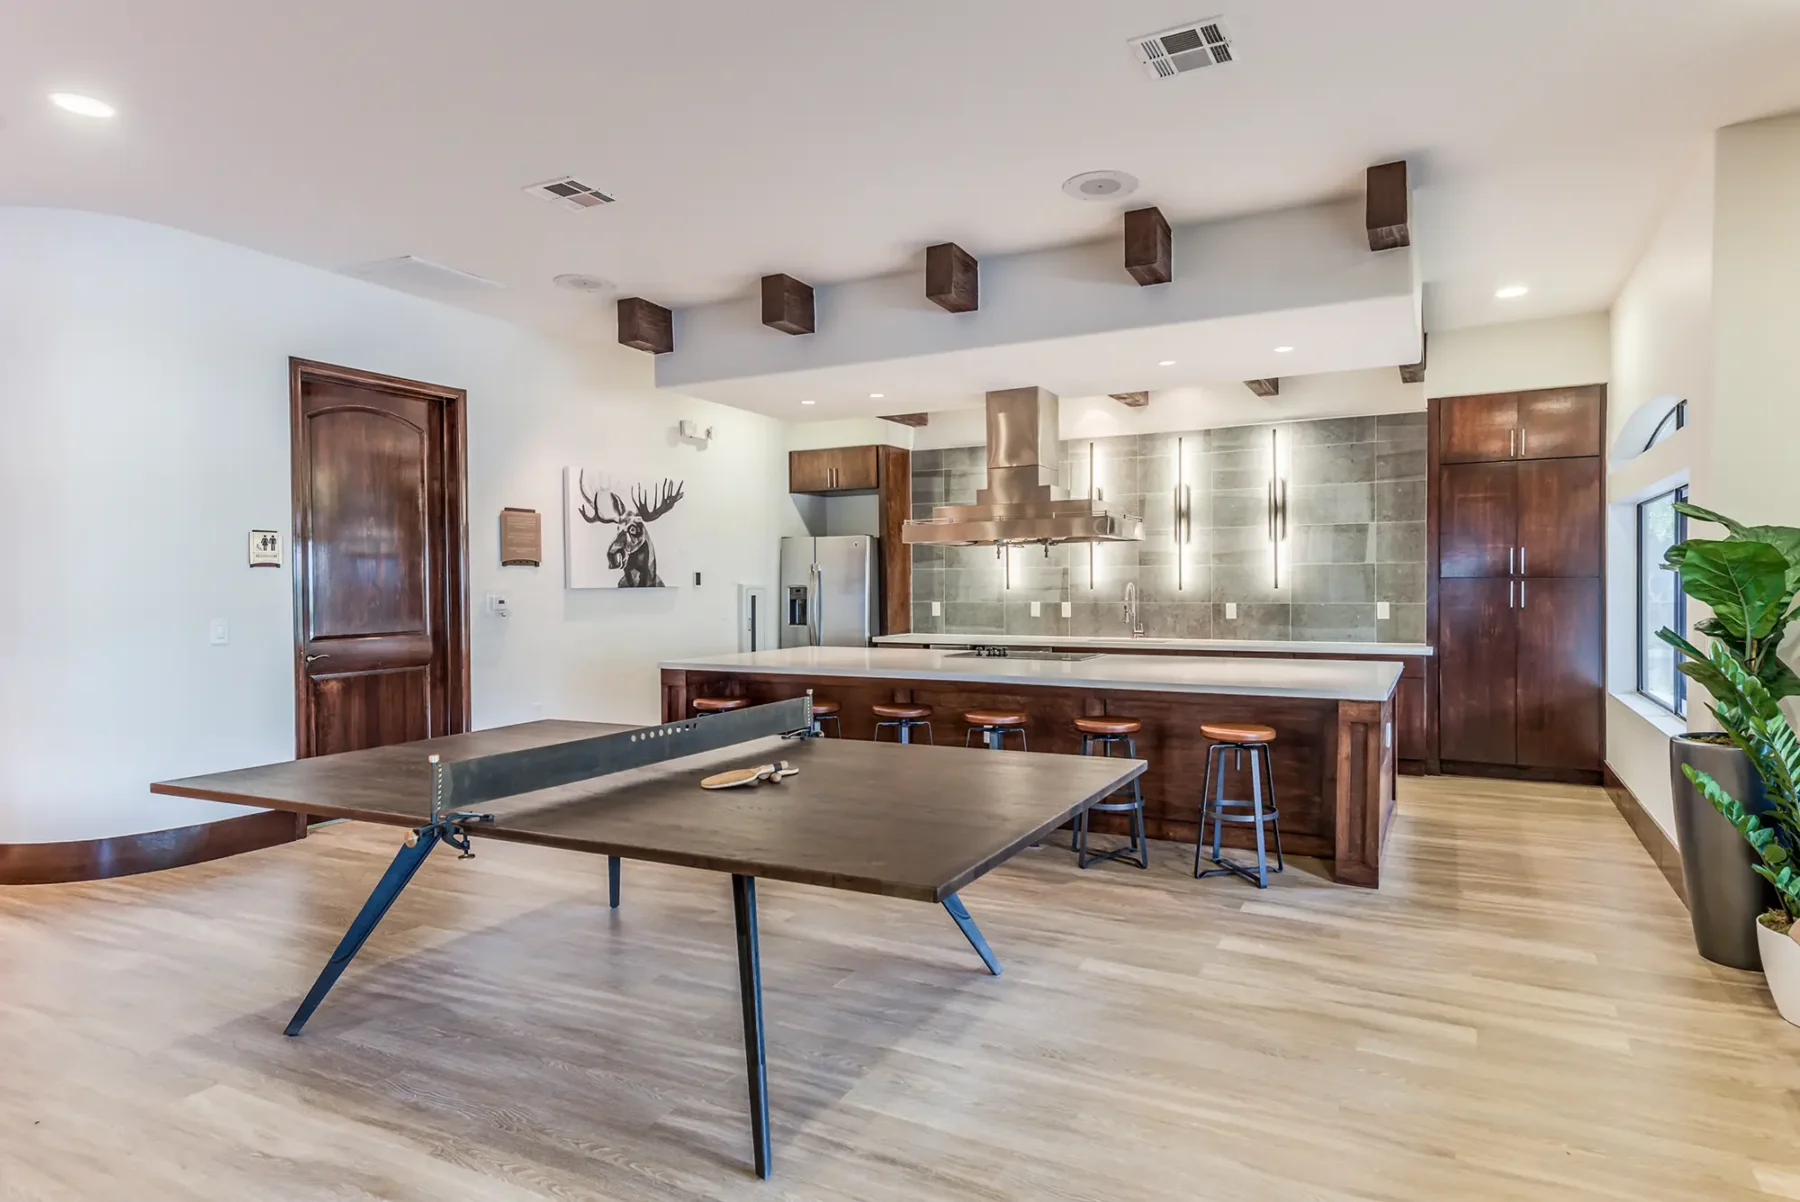 Clubhouse demonstration kitchen and ping pong table